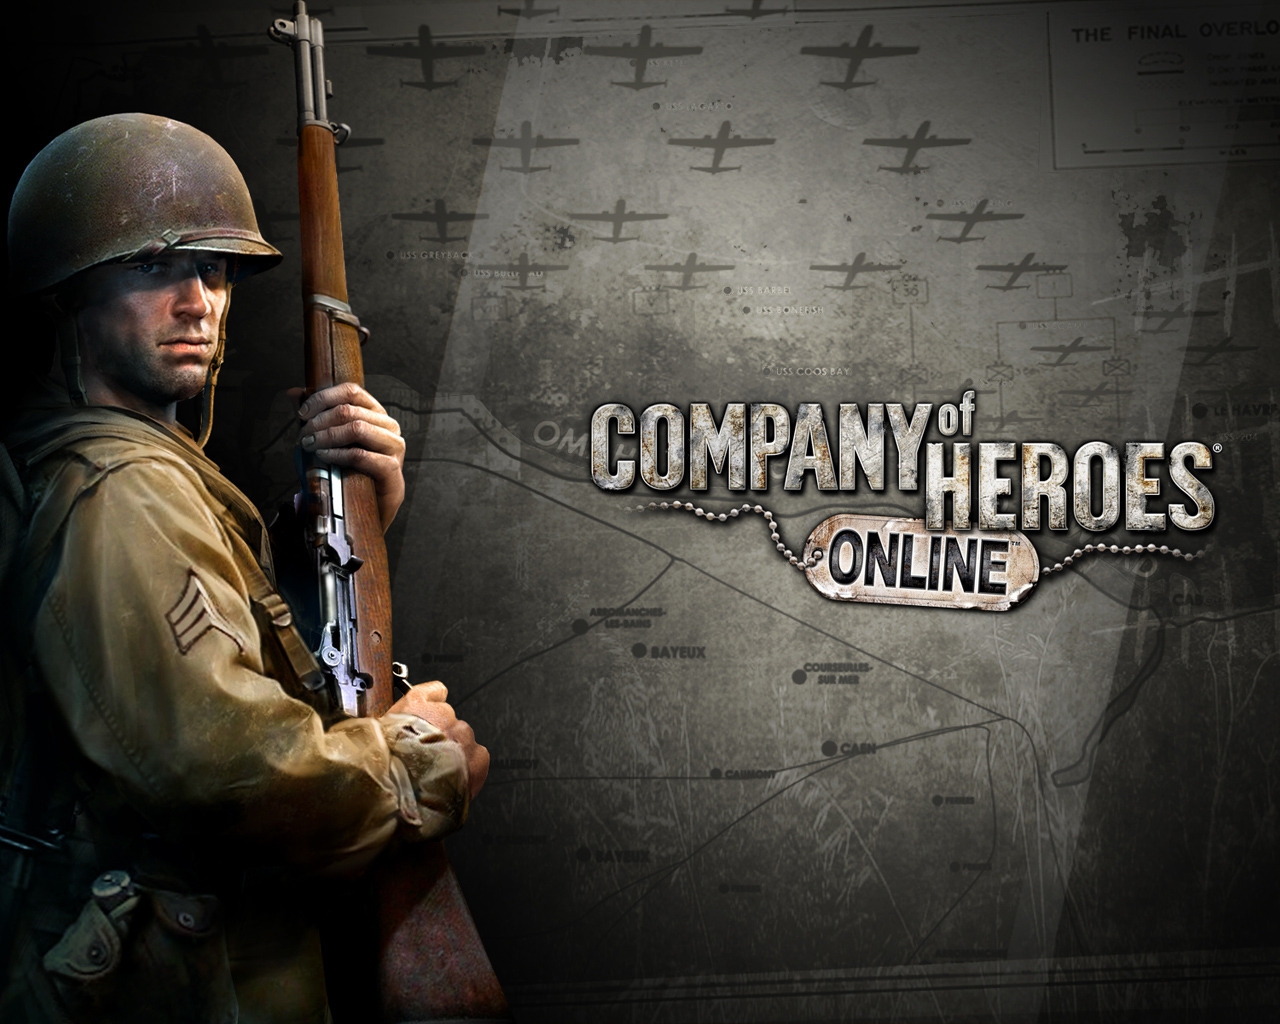 Company of Heroes Online Game for 1280 x 1024 resolution